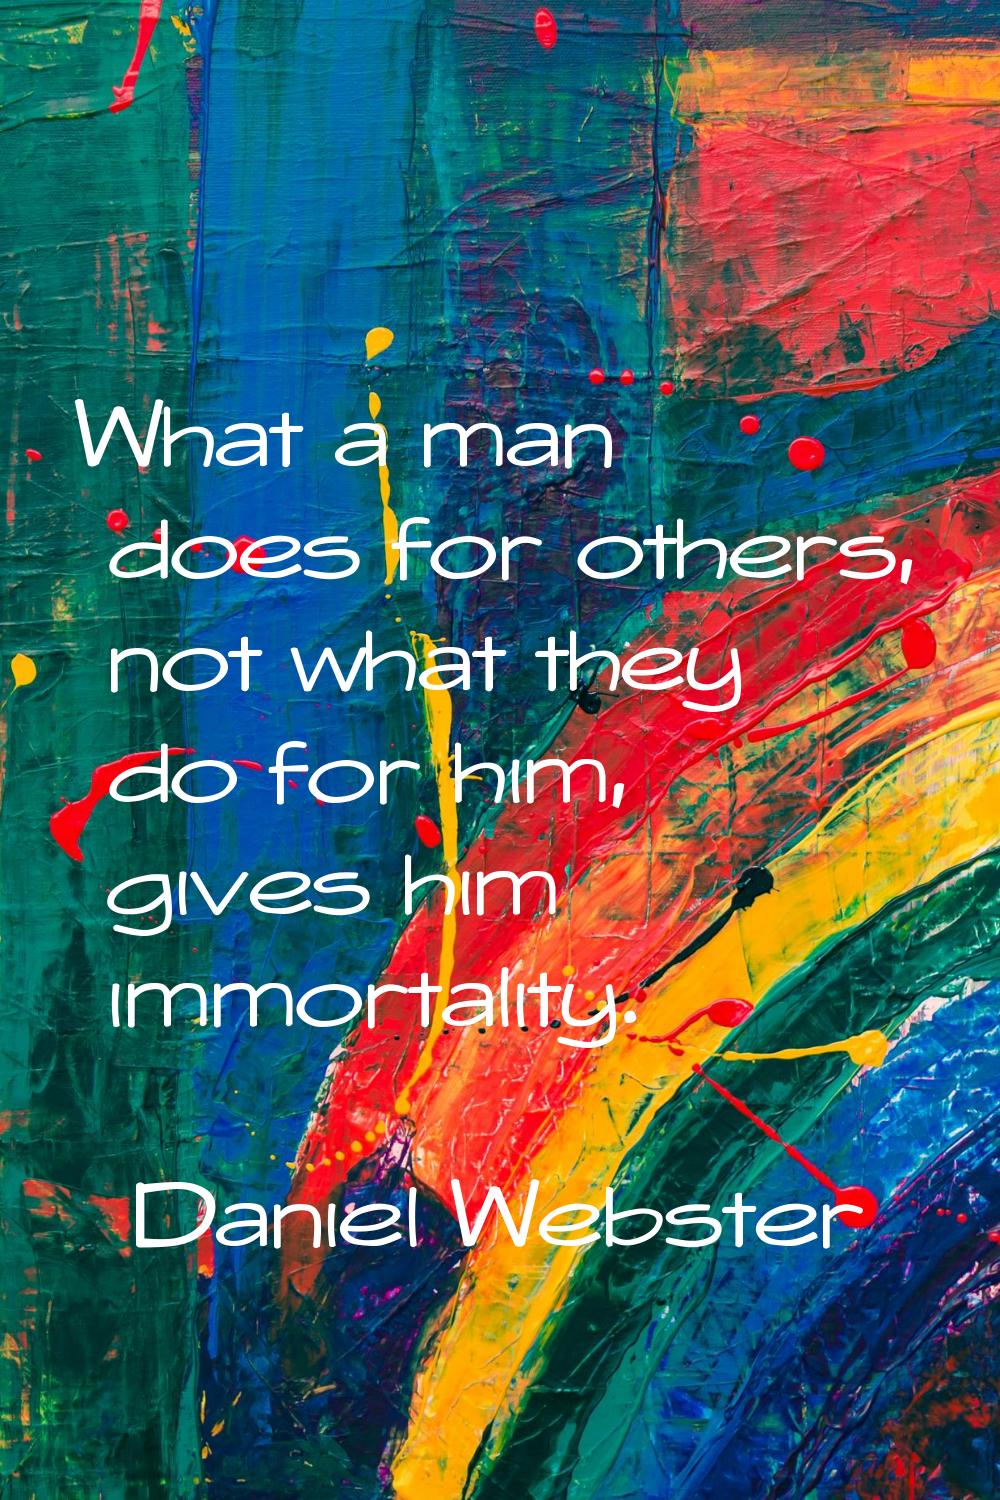 What a man does for others, not what they do for him, gives him immortality.